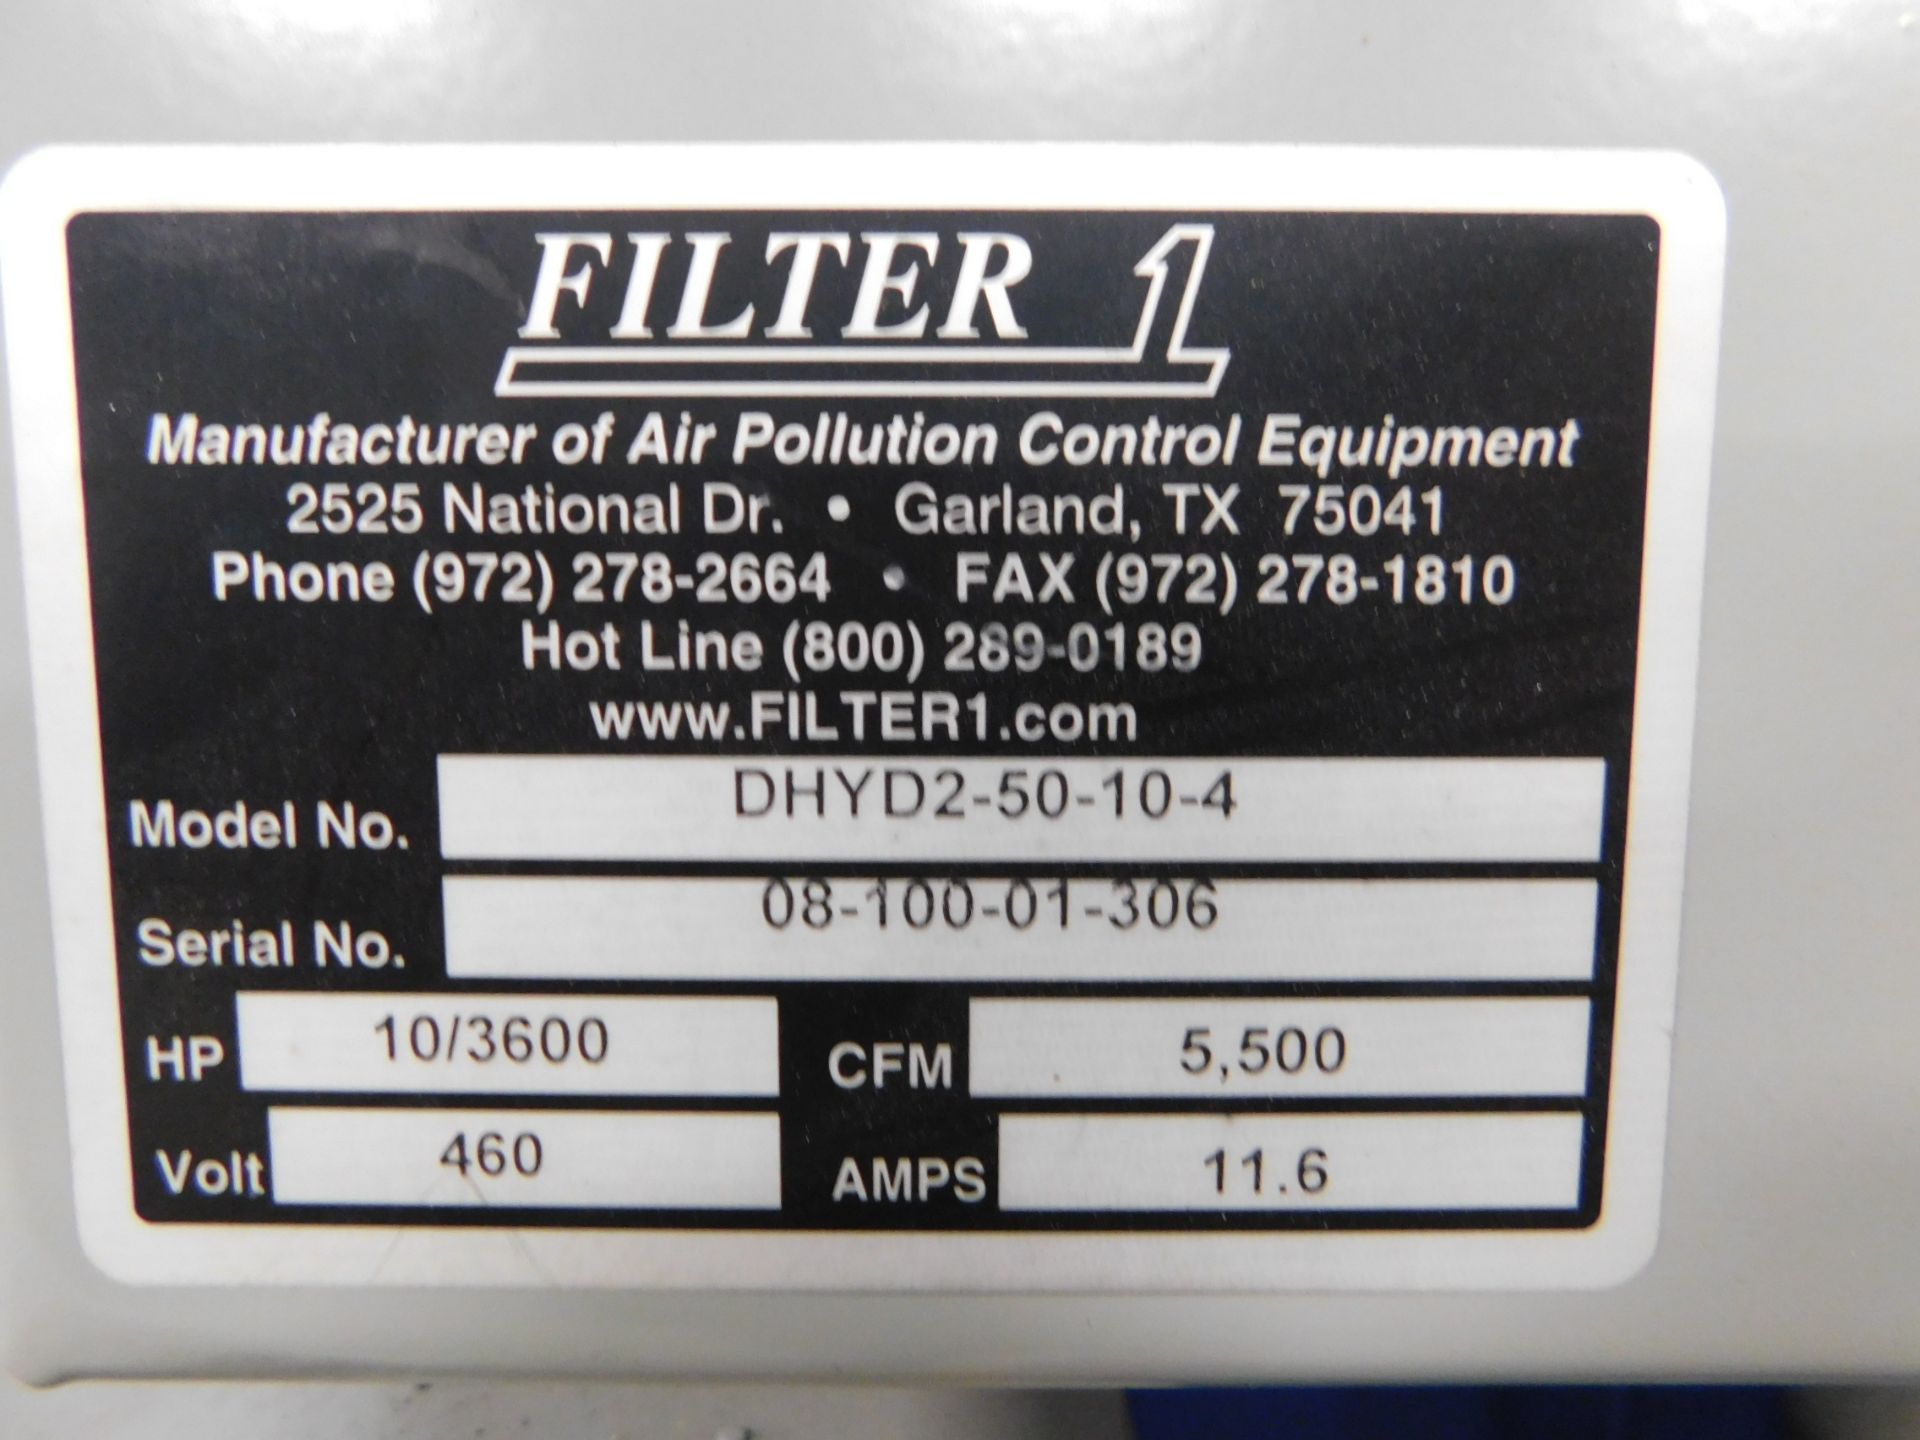 Filter 1 Hydrotron DHYD Dual Operator Down Draft Table, s/n 08-100-01-306, Water Filtration - Image 13 of 15